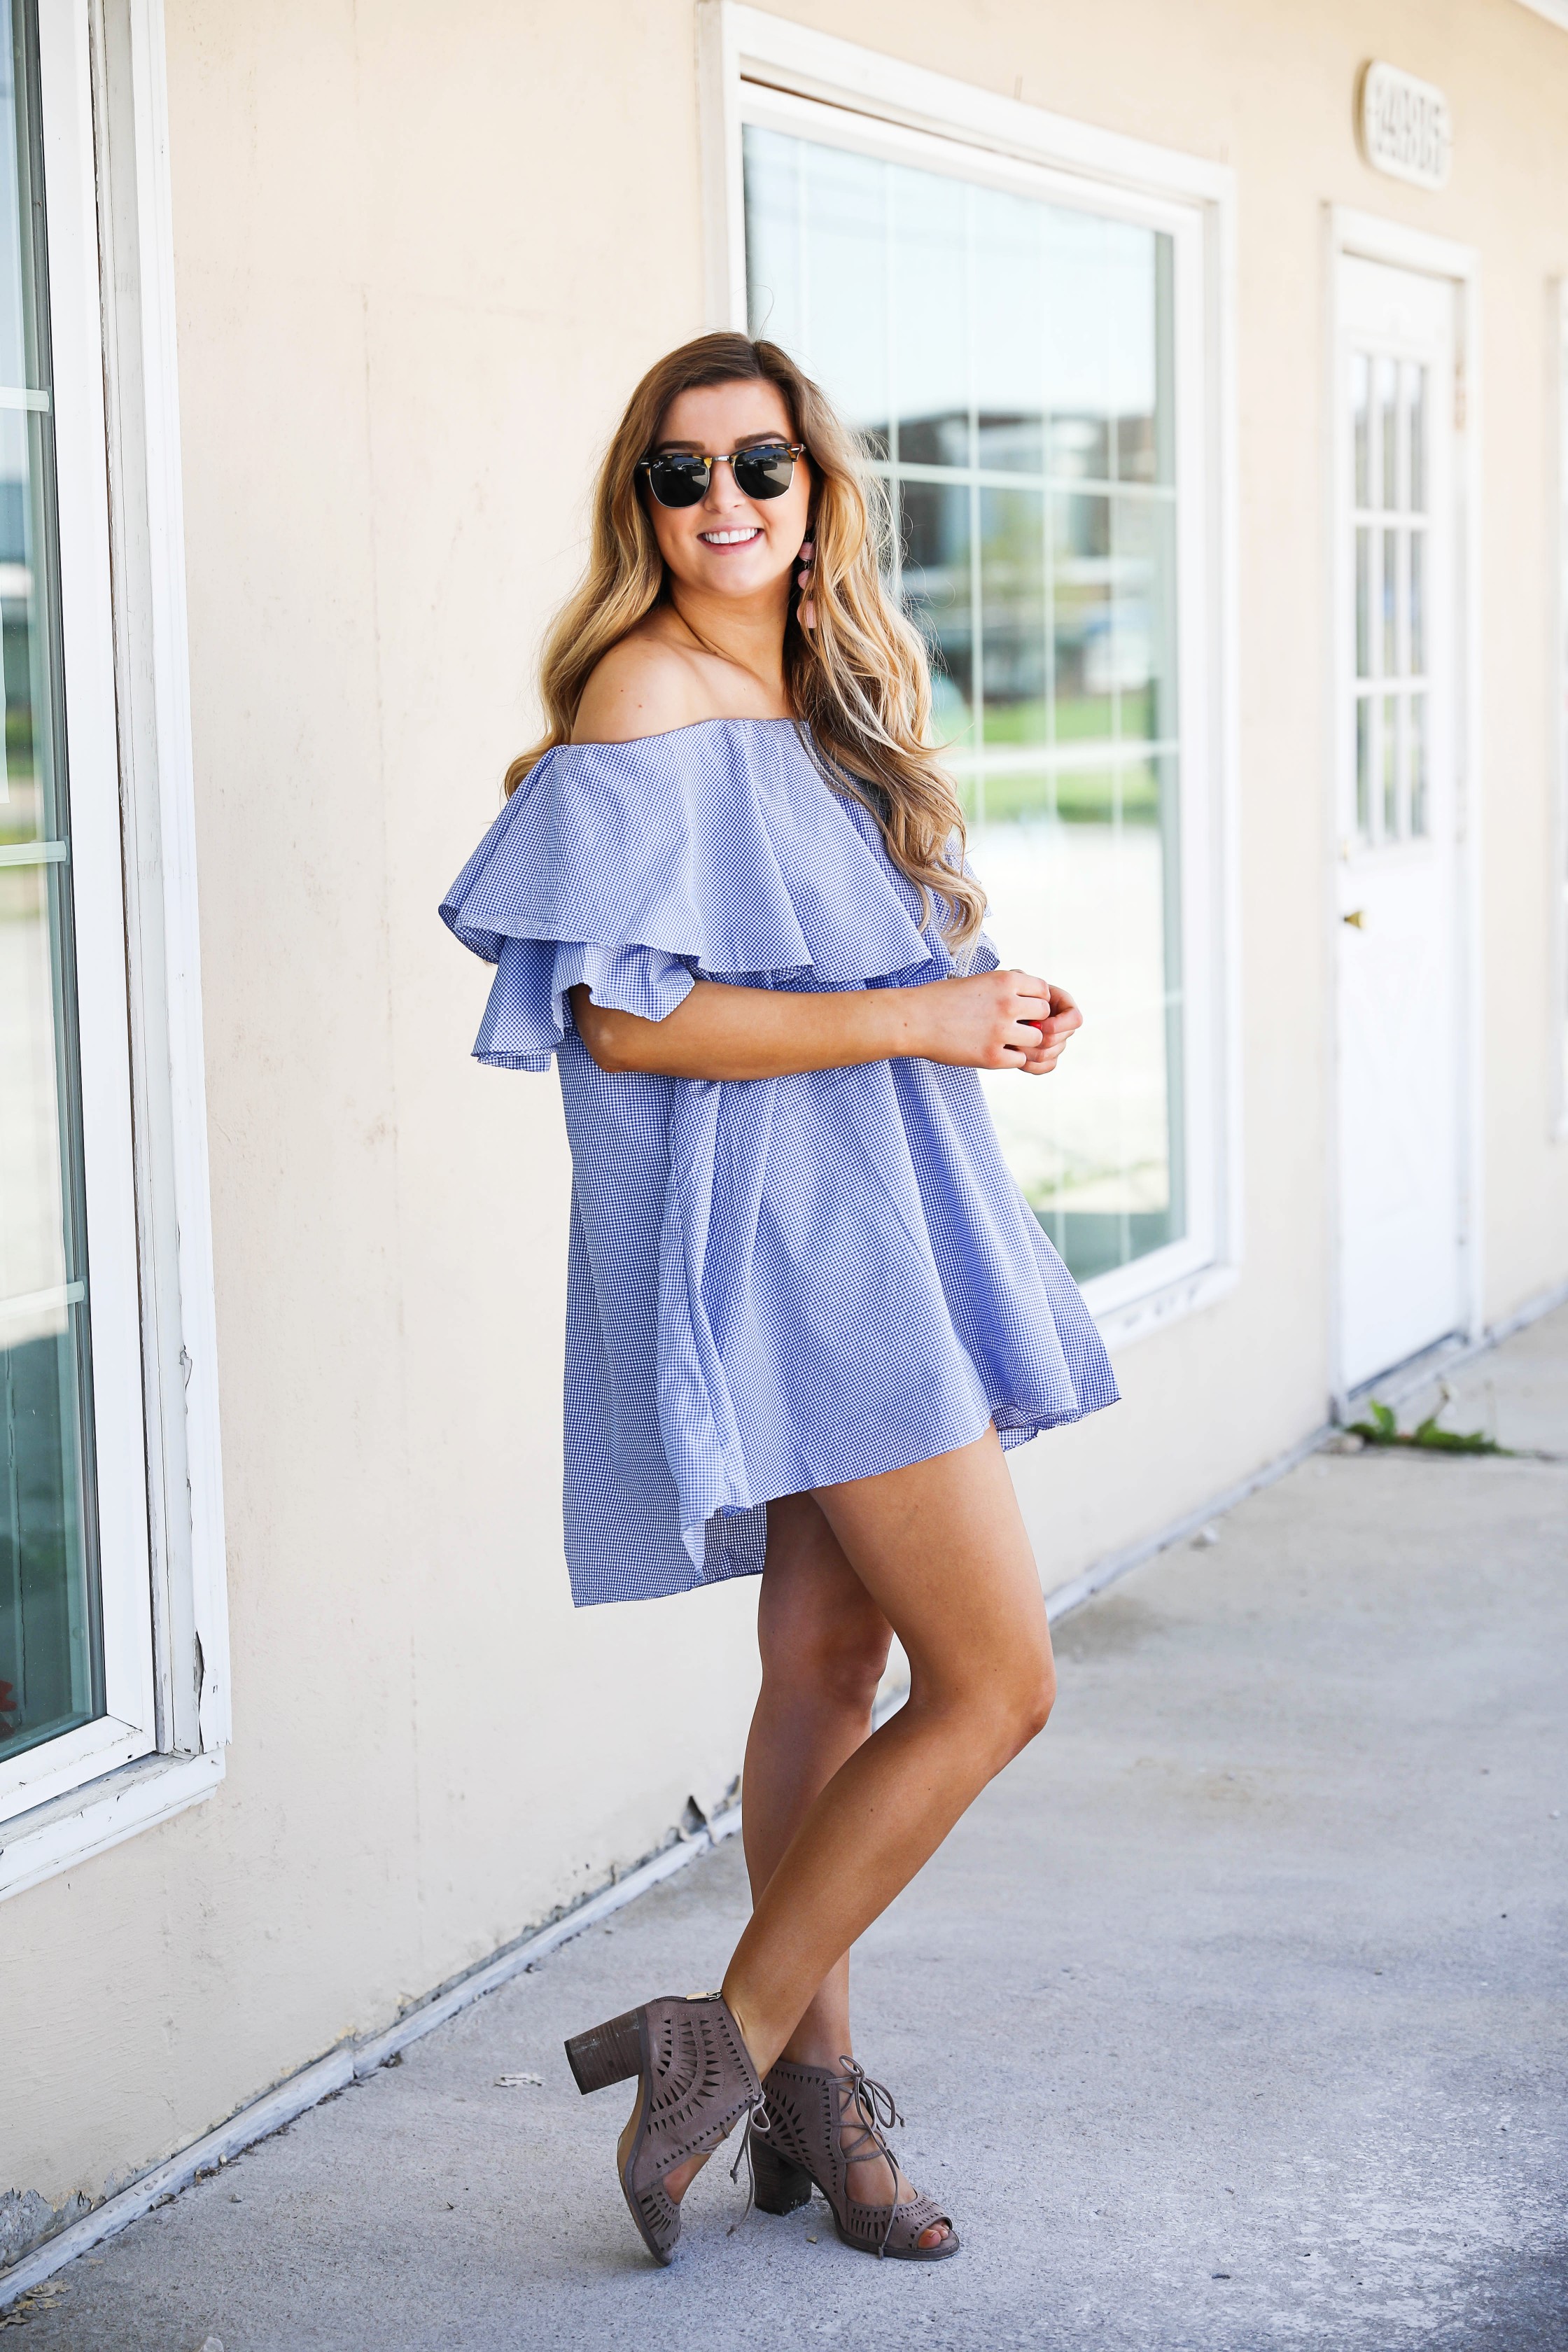 Off the shoulder gingham ruffle dress perfect for spring outfit ideas or summer dresses. by Lauren Lindmark on dailydoseofcharm.com daily dose of charm